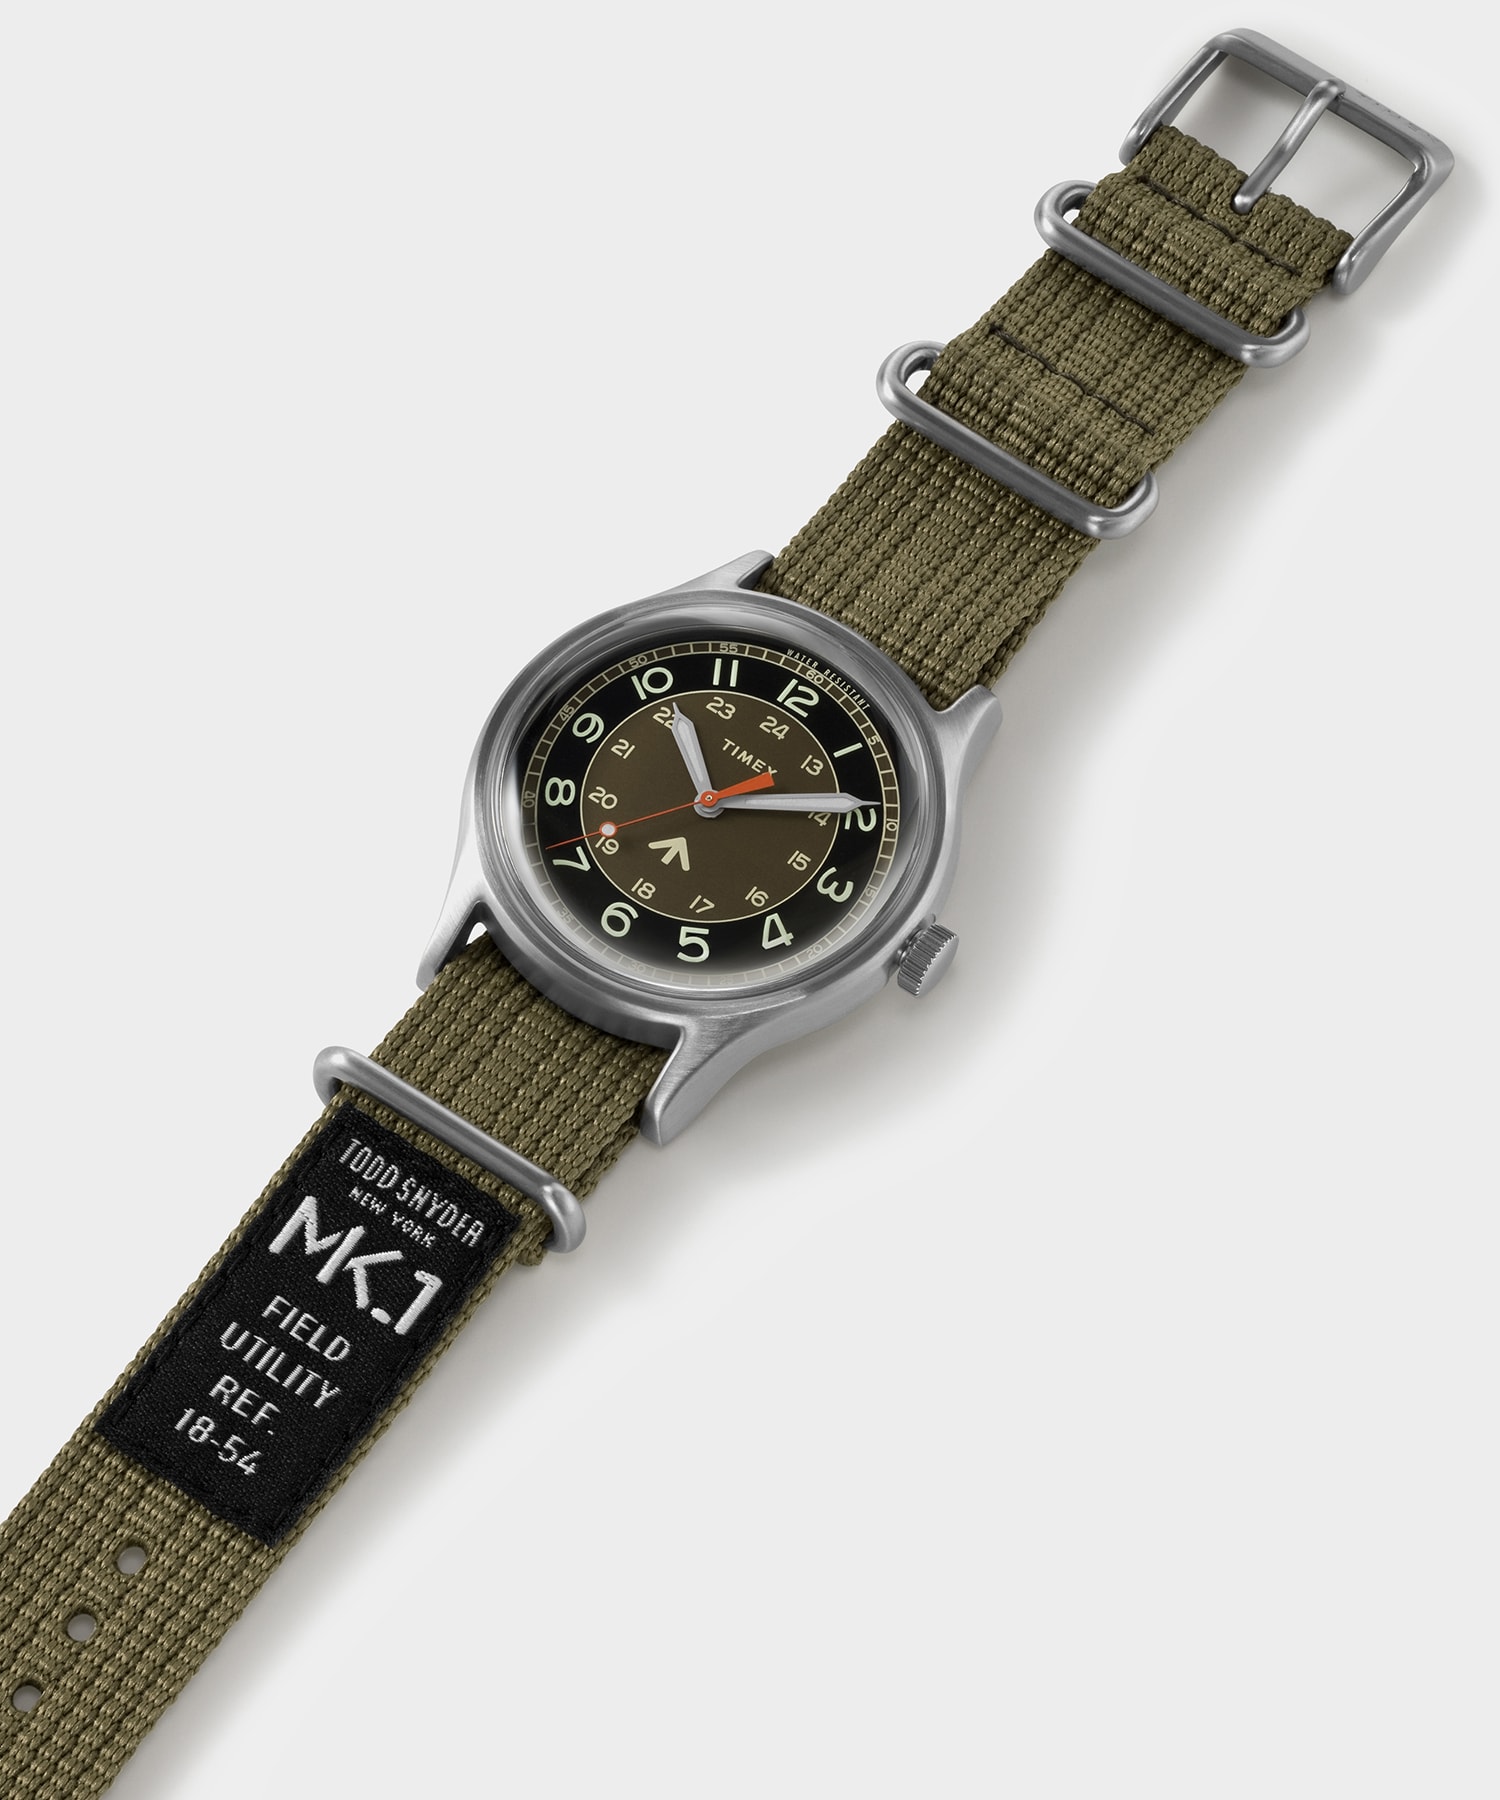 Introducing the Timex MK1 Bootcamp for Todd Snyder